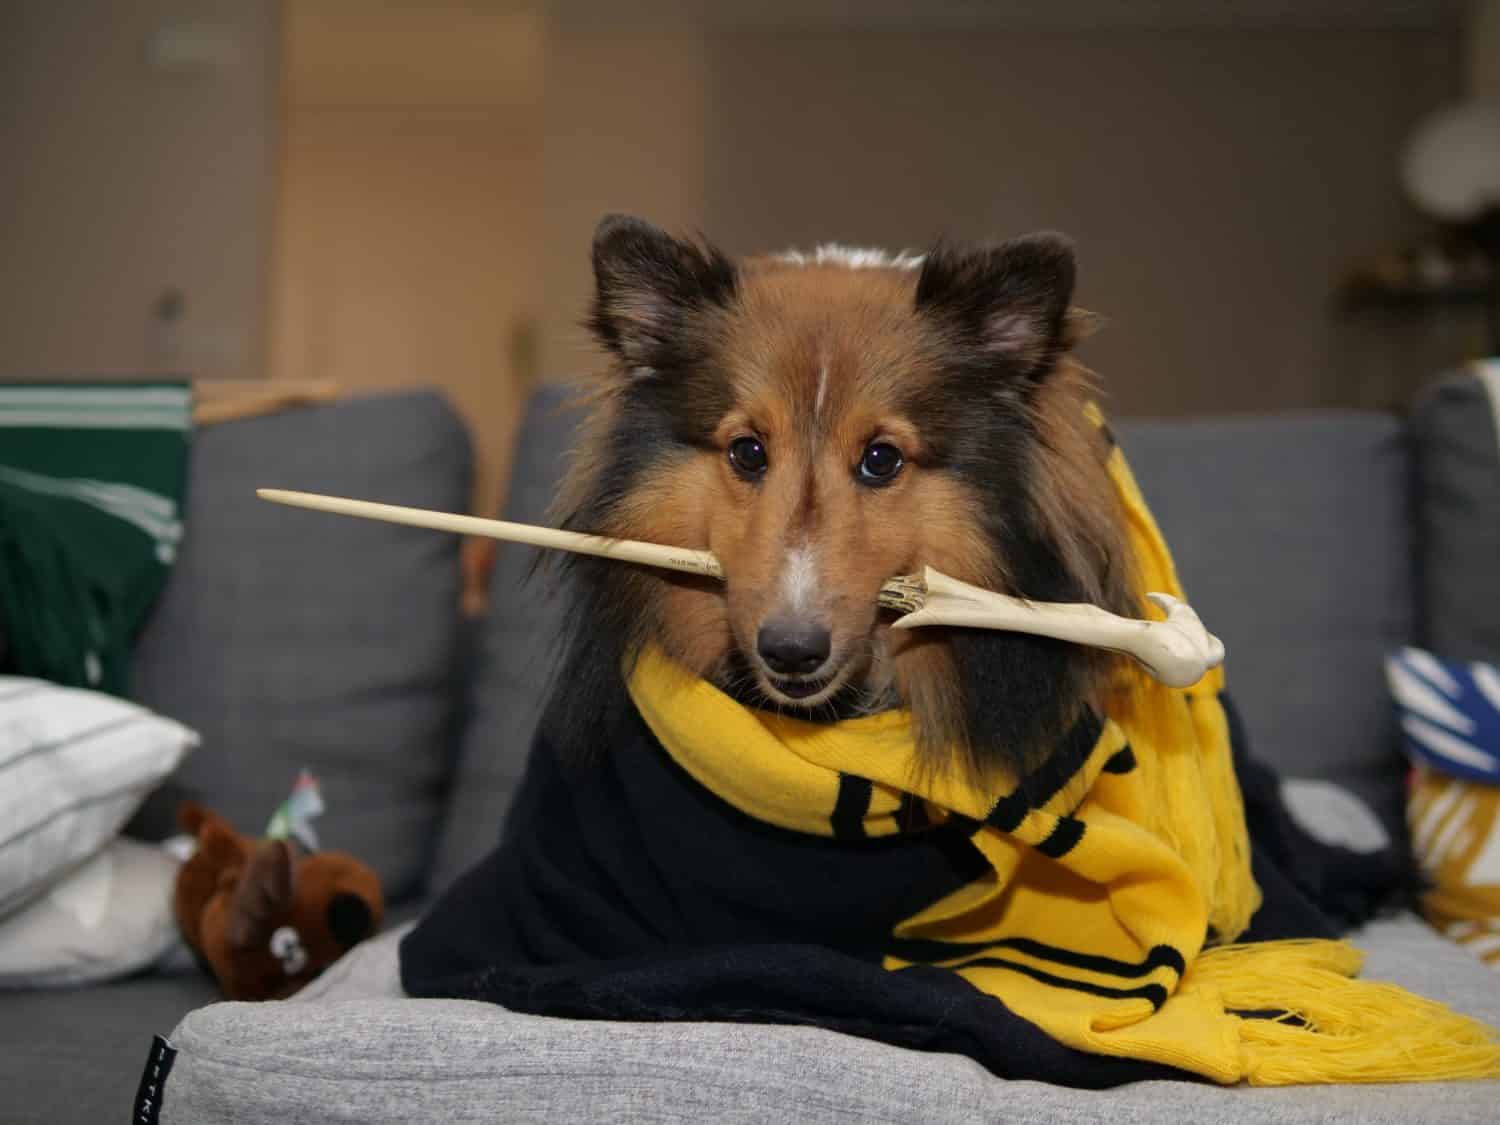 A Shetland Sheepdog cosplay as a wizard in Harry Potter